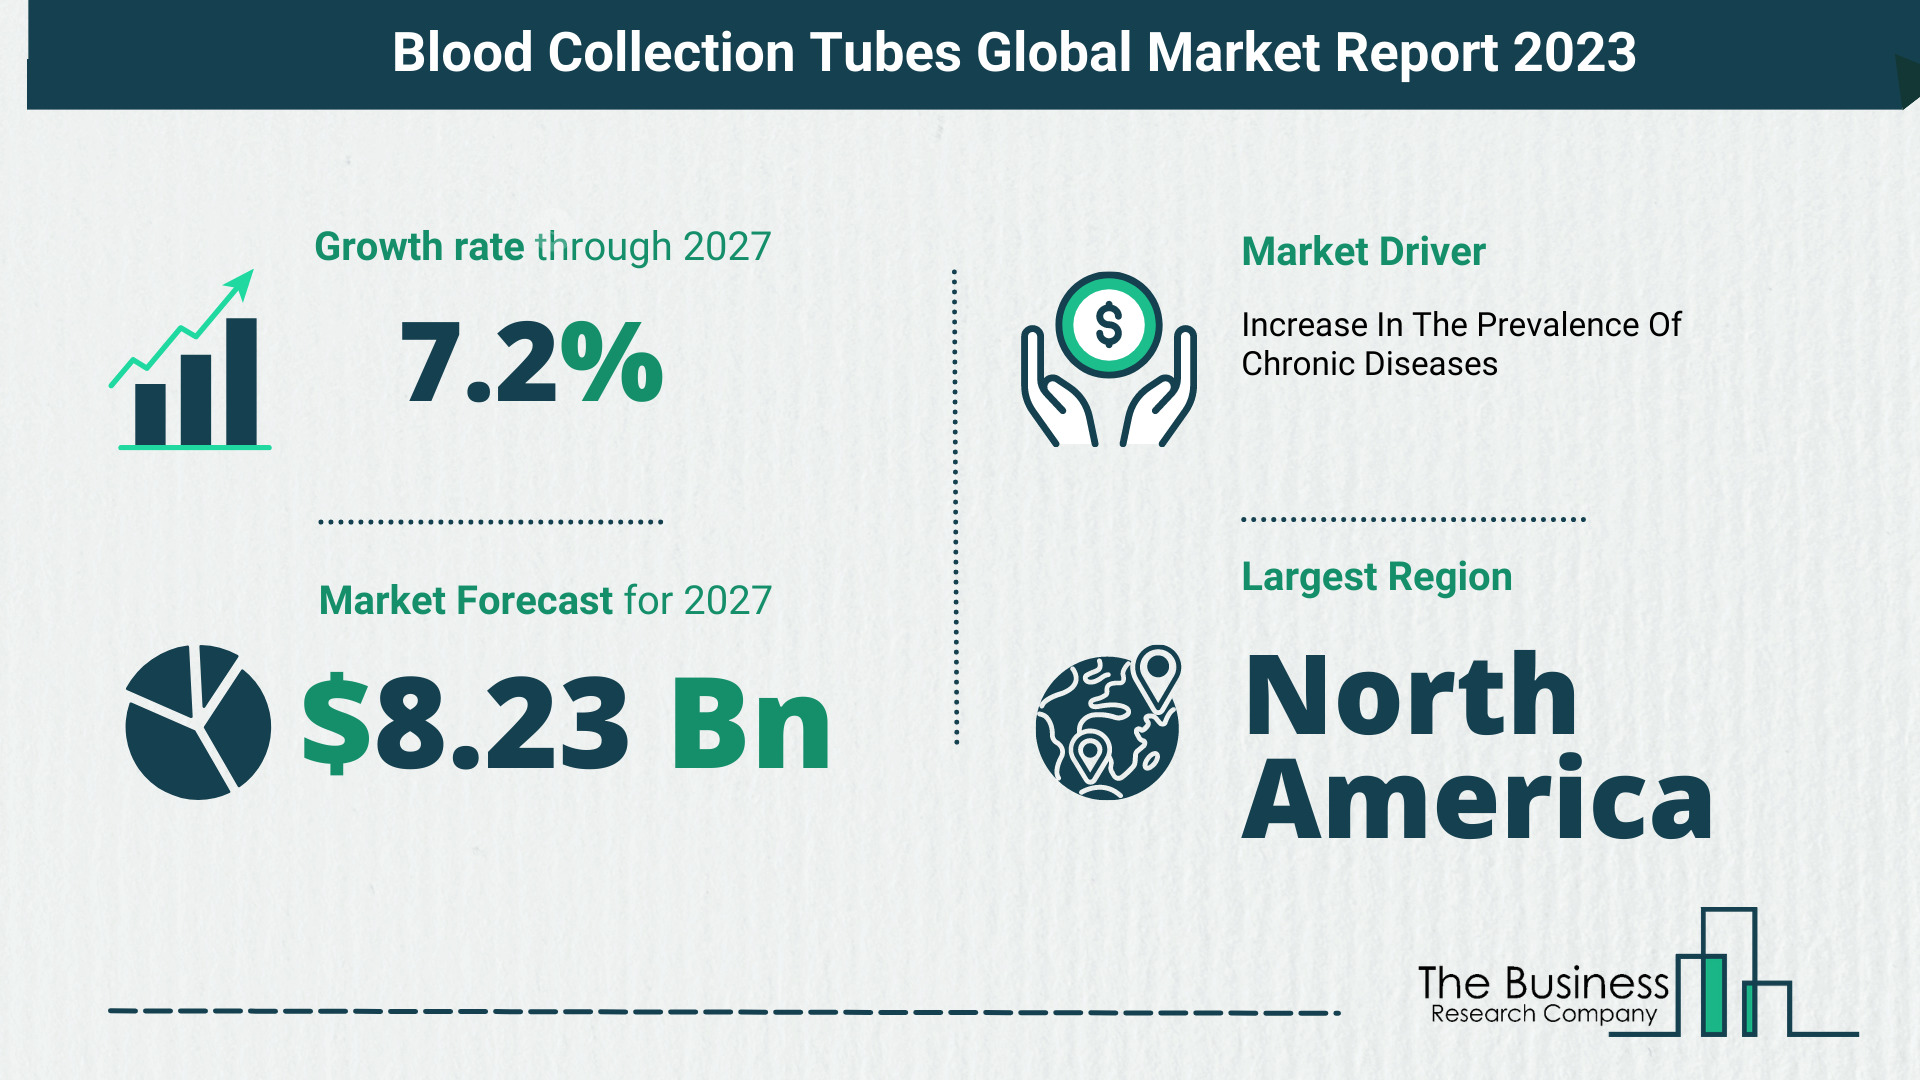 How Will The Blood Collection Tubes Market Globally Expand In 2023?